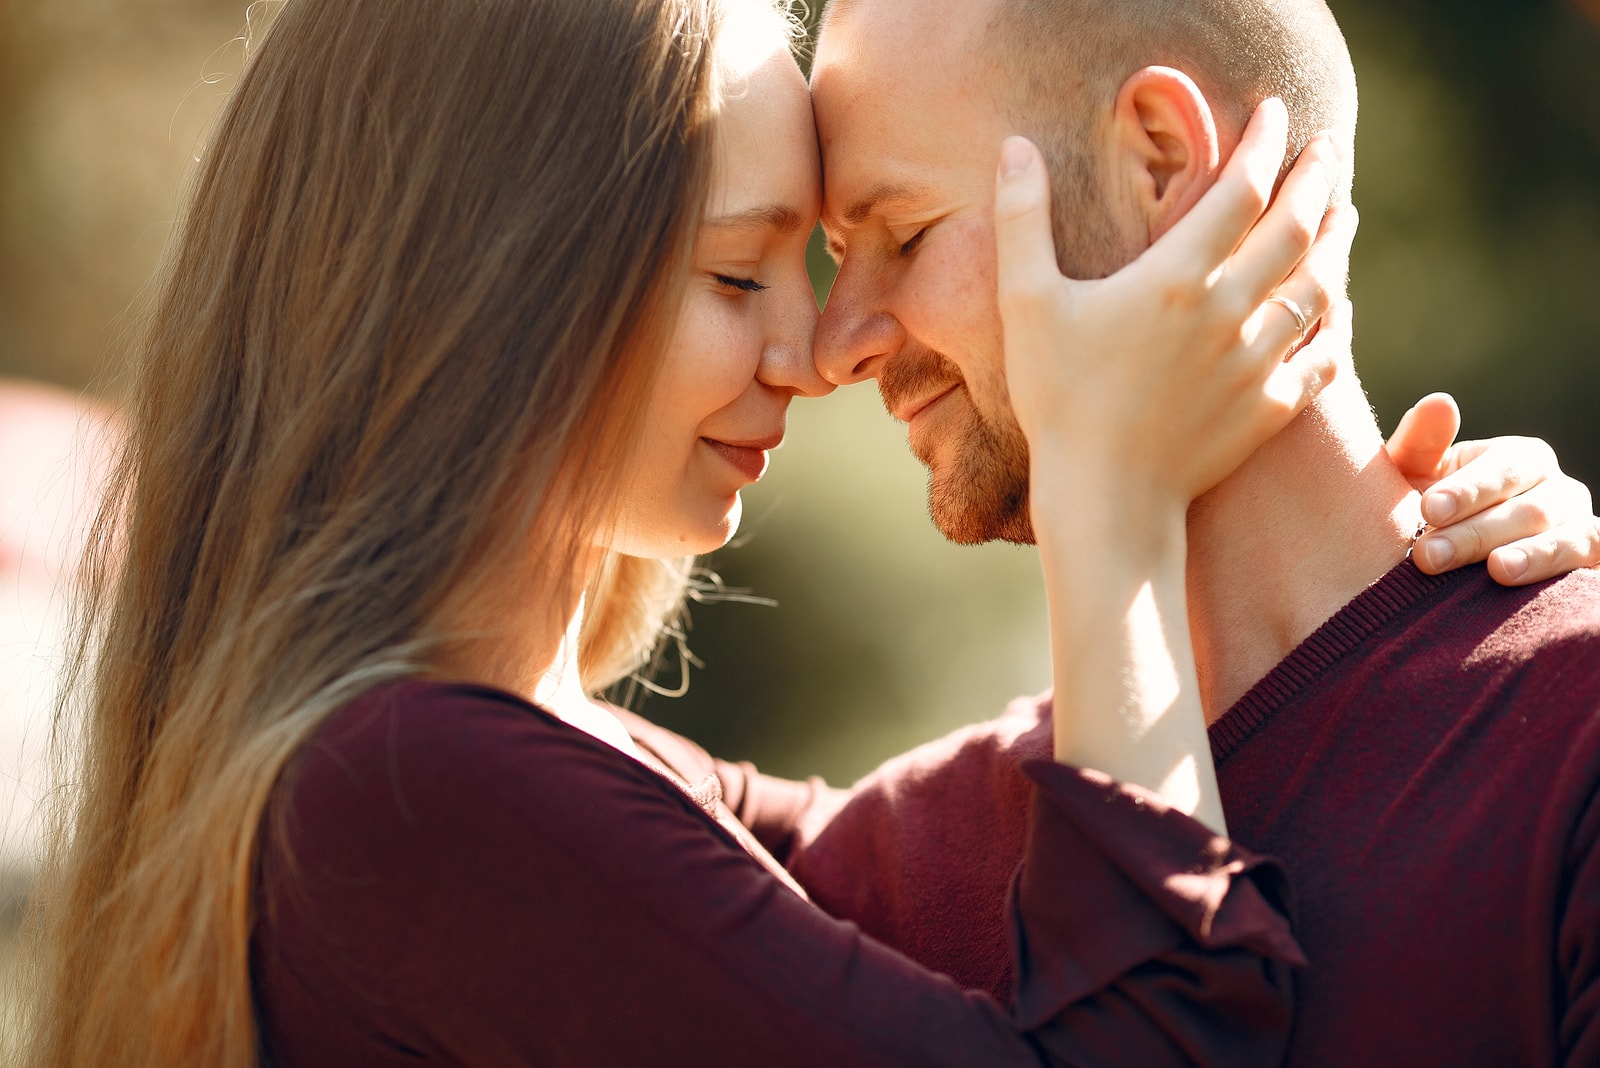 How Each Zodiac Sign Knows They’ve Found Their Forever Person